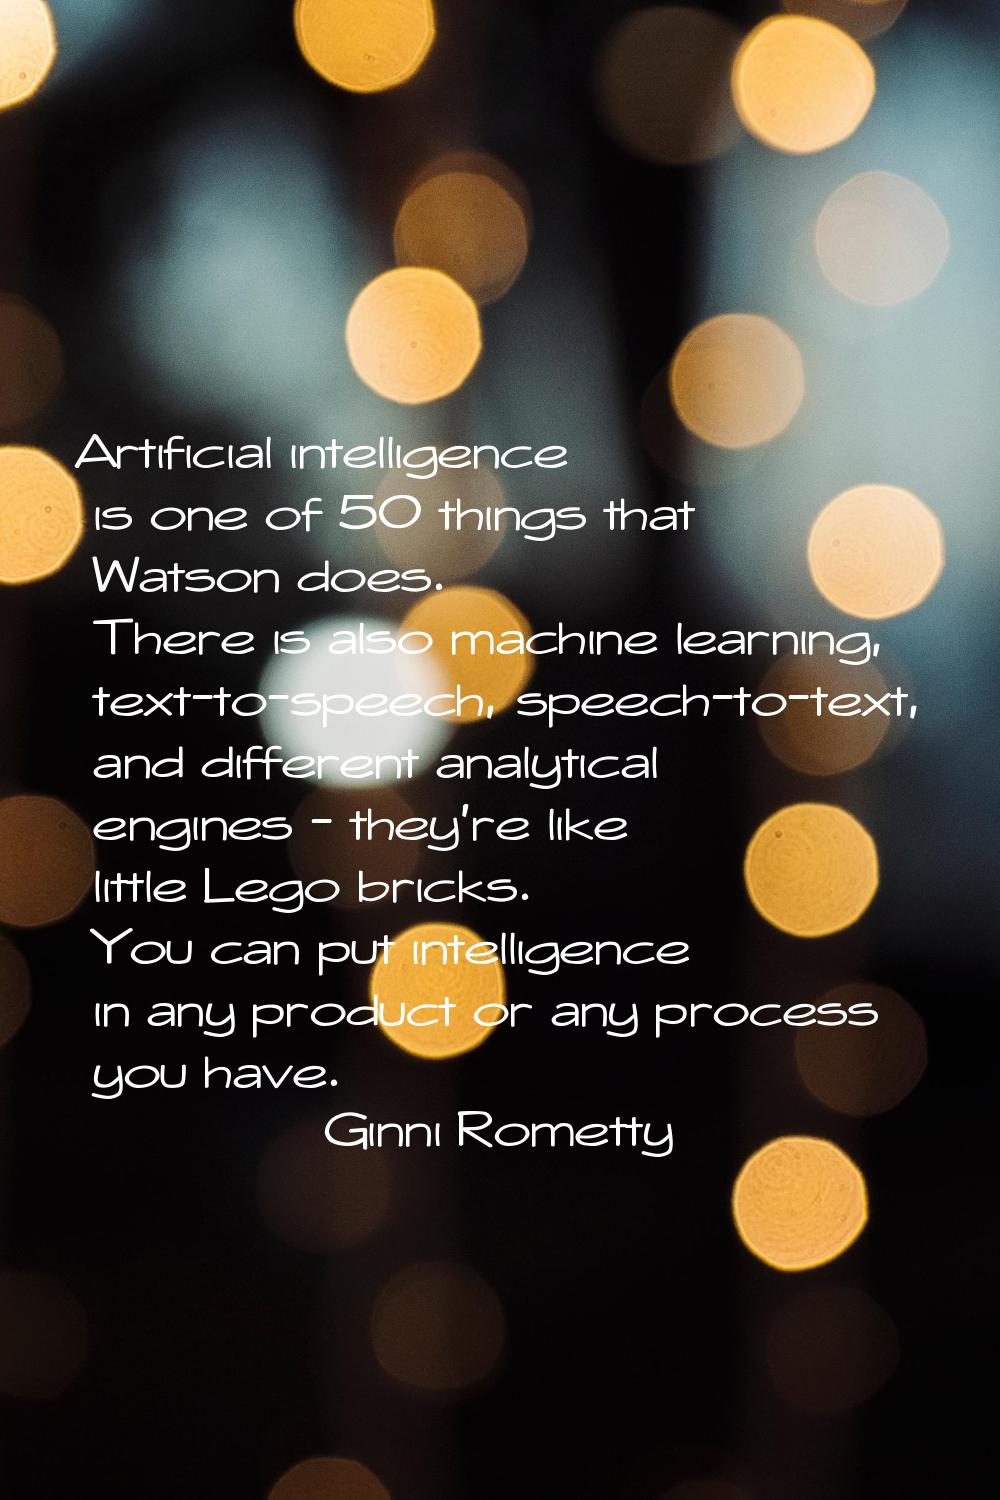 Artificial intelligence is one of 50 things that Watson does. There is also machine learning, text-